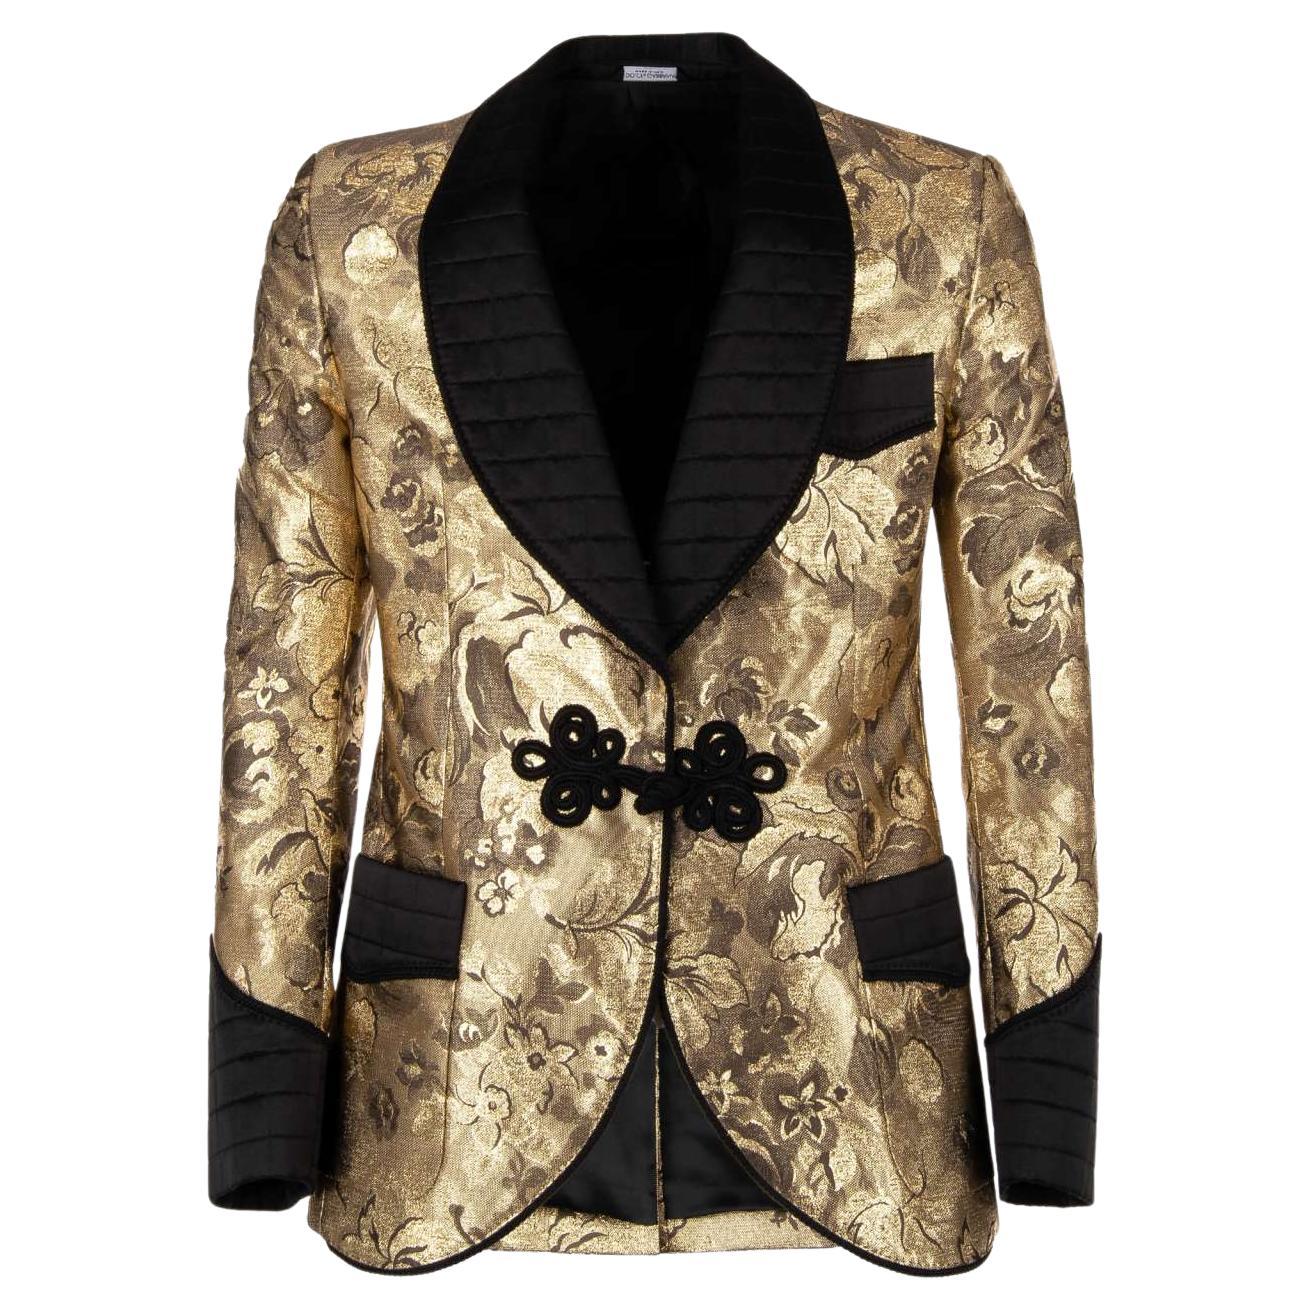 Dolce & Gabbana Baroque Floral Tuxedo Blazer with Rope Closure Black Gold 46 For Sale